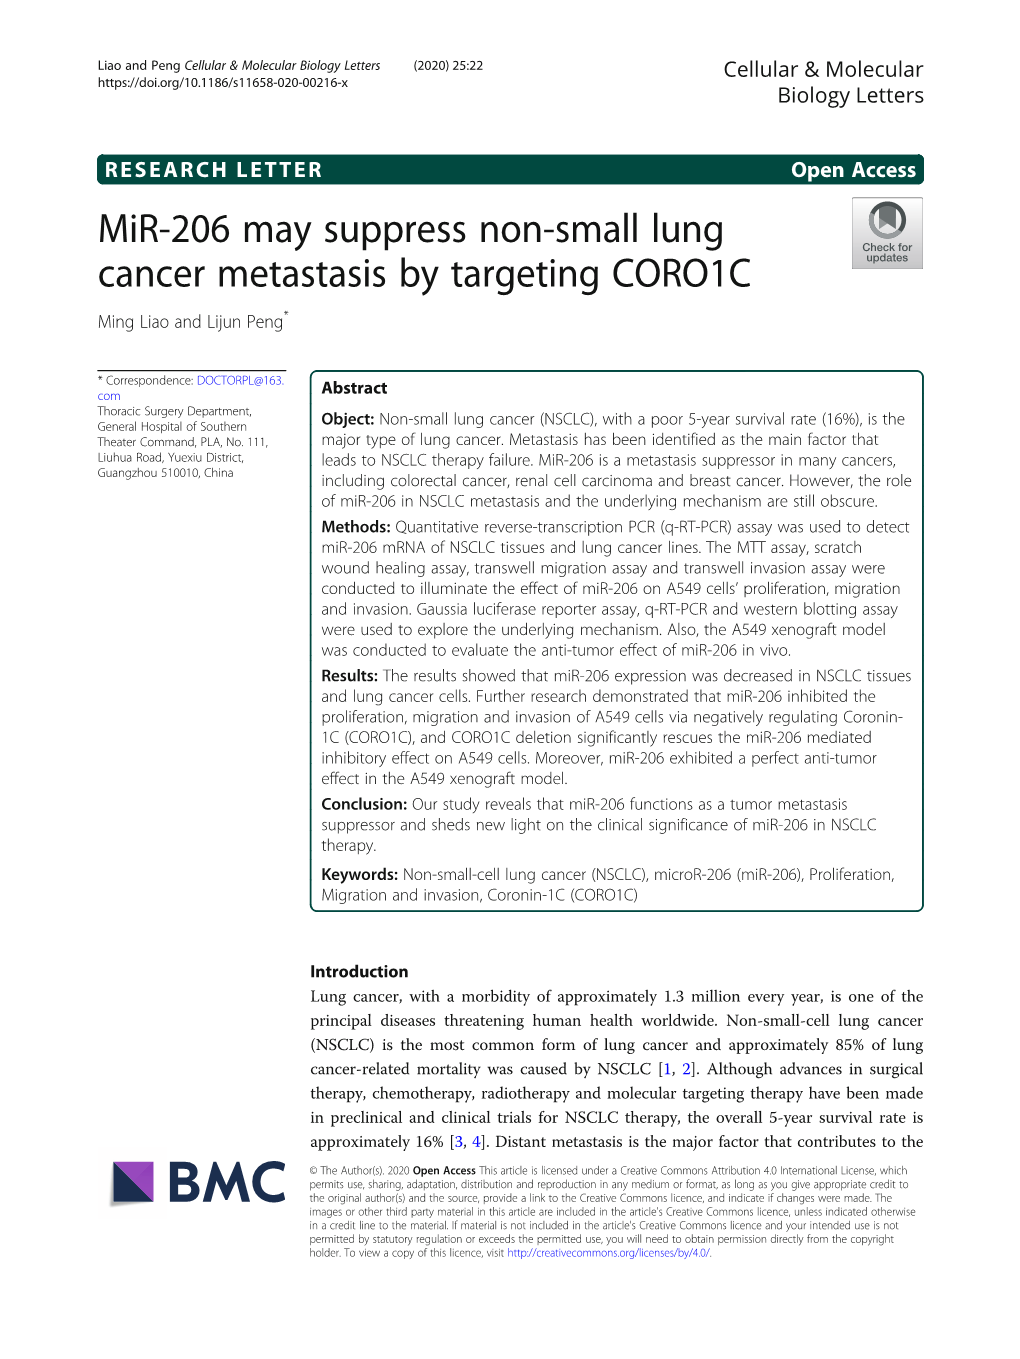 Mir-206 May Suppress Non-Small Lung Cancer Metastasis by Targeting CORO1C Ming Liao and Lijun Peng*